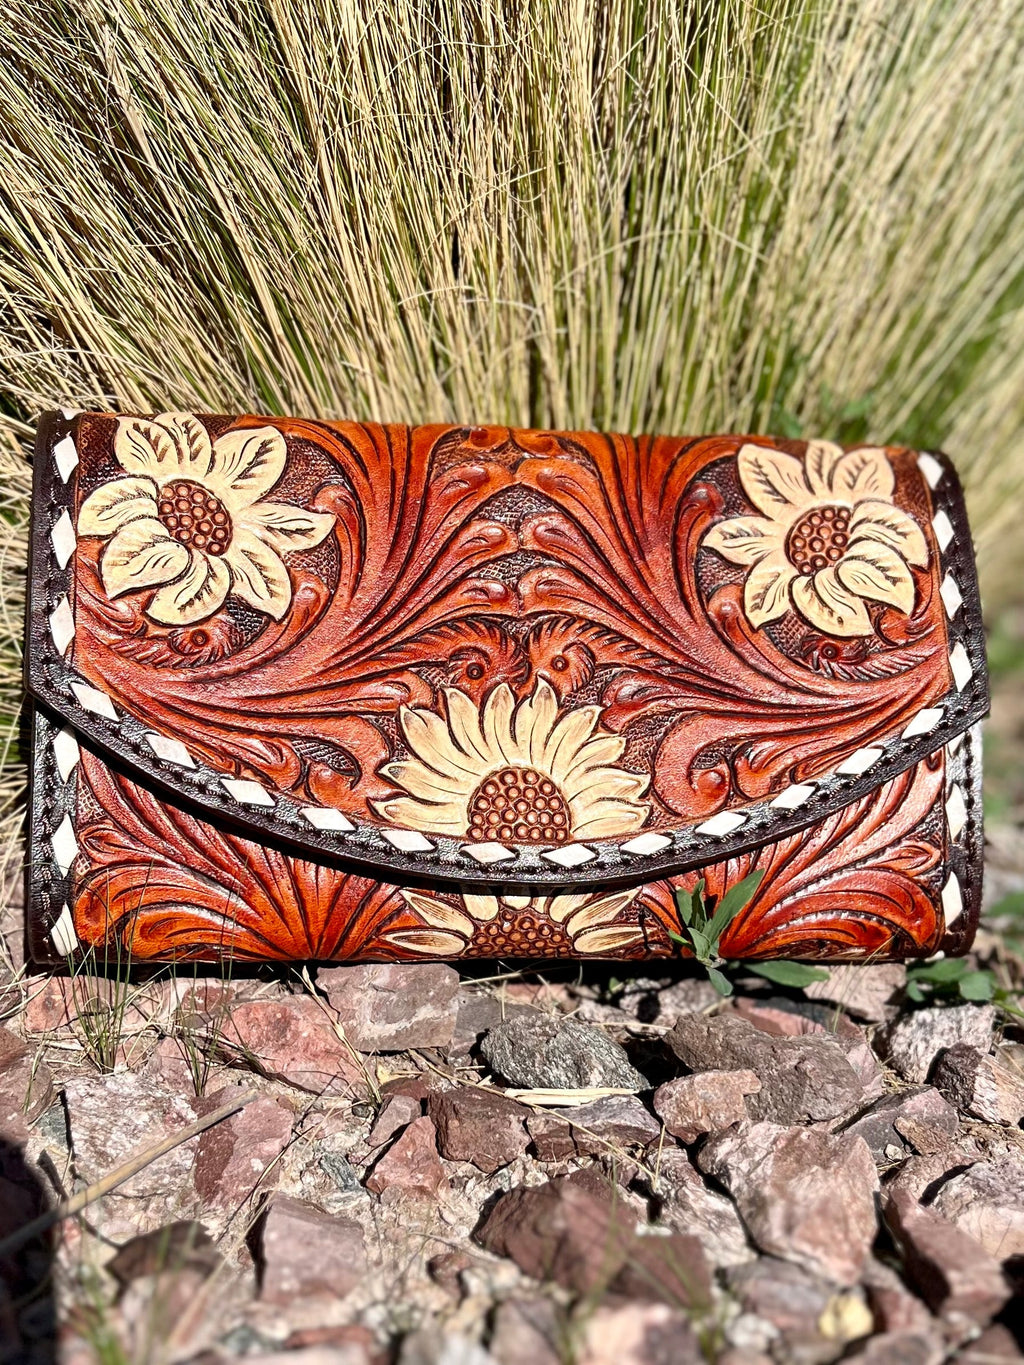 Introducing the Field of Sunflowers Wallet--the perfect companion for going out on the town! With an eye-catching floral tooling and a white whip stitch, you'll be stoppin' traffic all night. Brown leather and ready for a wristlet, crossbody, or wallet, this 4"X8" beauty has multiple credit card slots and compartments to keep your stuff safe and secure. So go ahead--make a style statement!